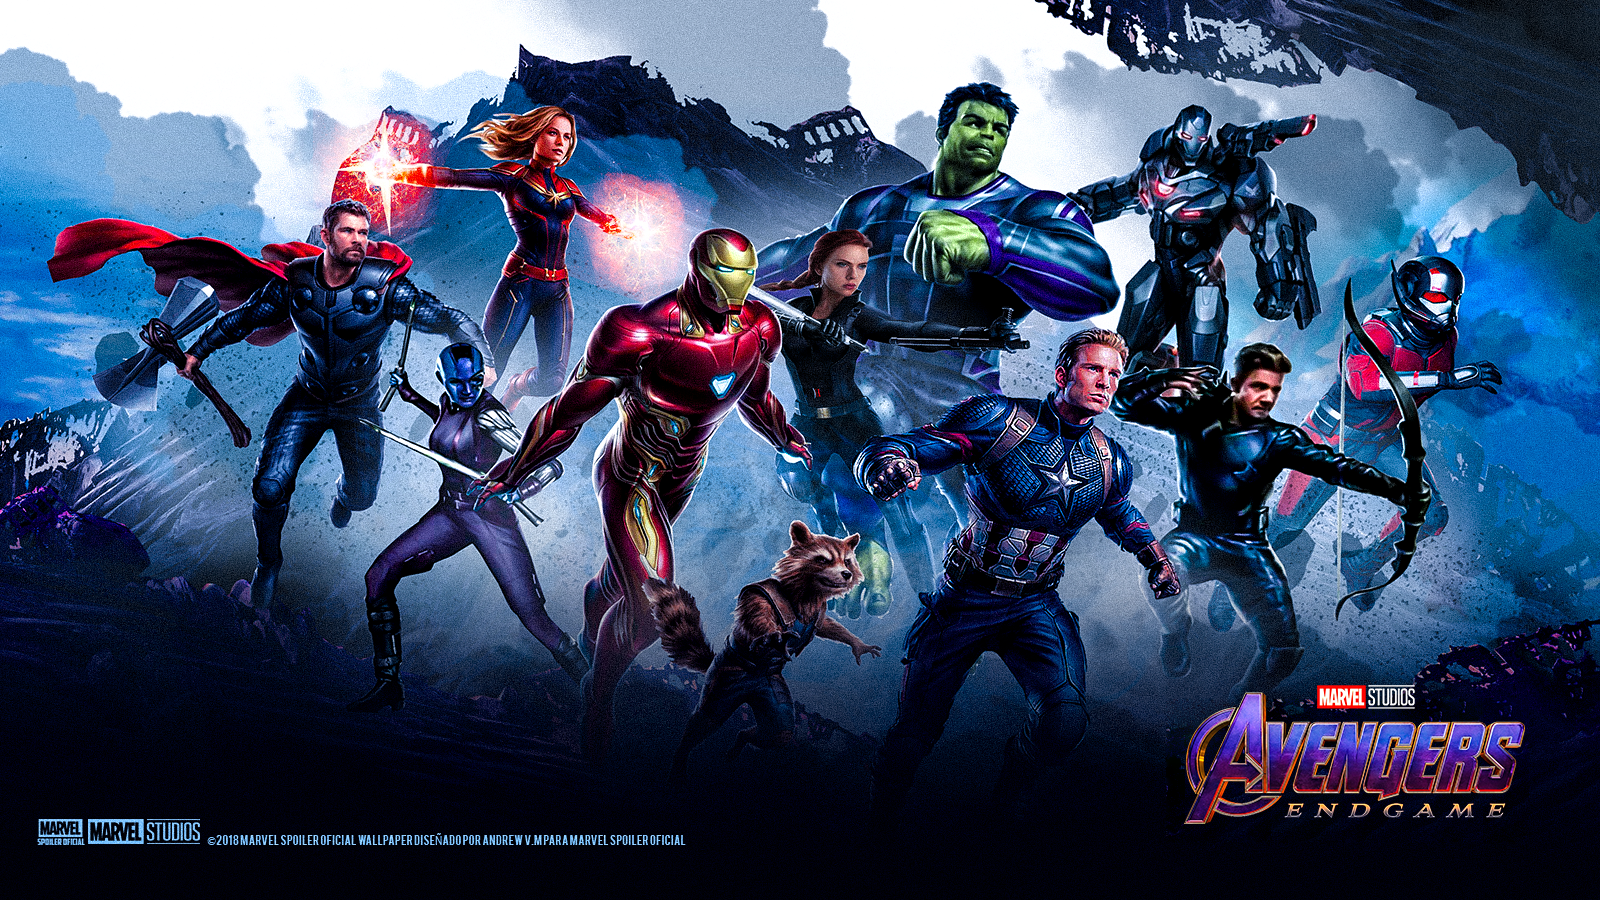 Avengers 4 End Game And Infinity War Hd Wallpapers Download In 4k